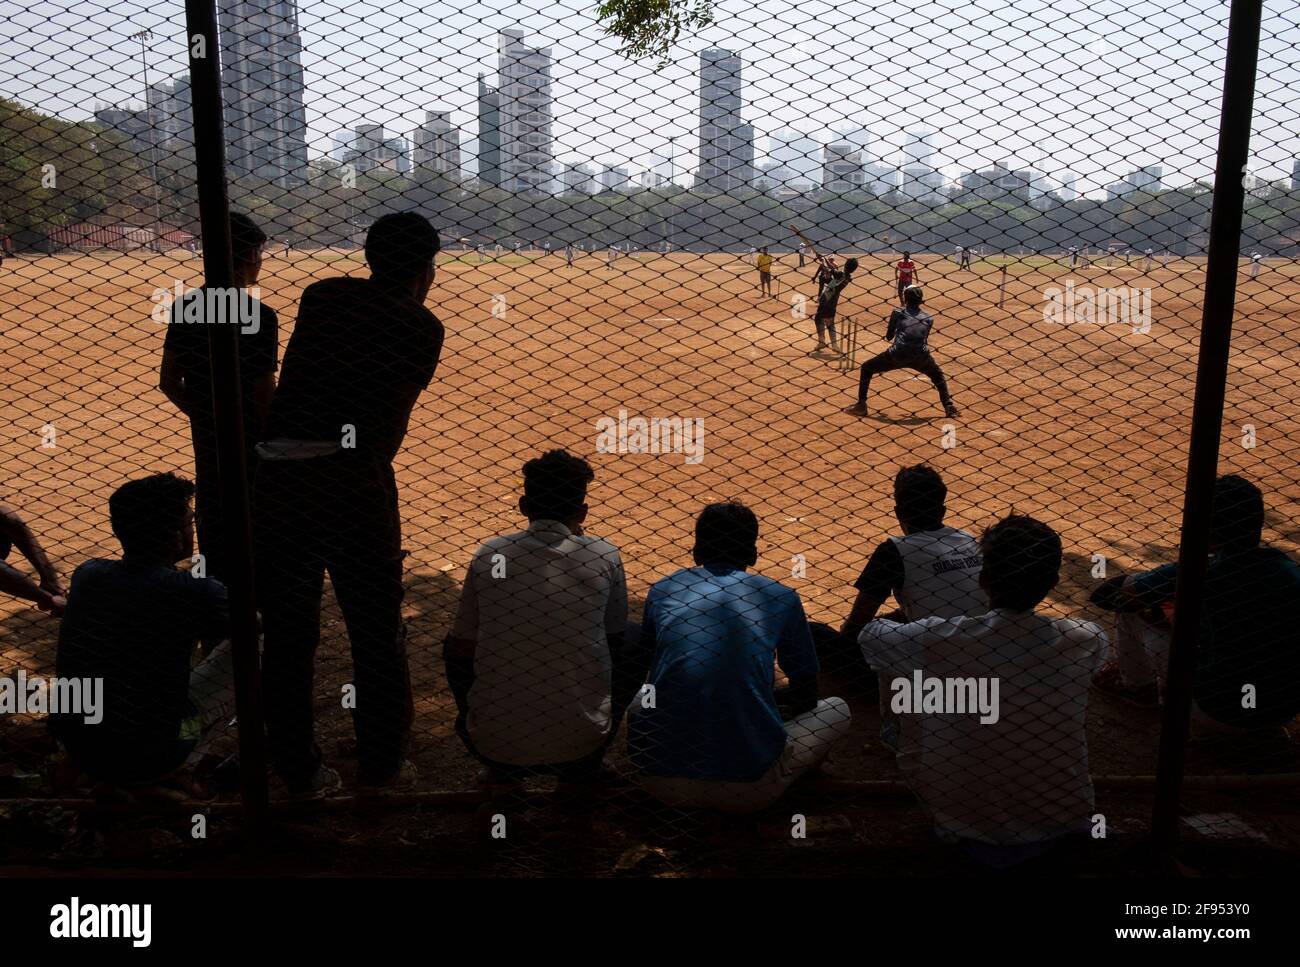 Silhouette of teenagers standing behind a fence watching a cricket match in Shivaji Park in Mumbai-Dadar,Maharashtra, India Stock Photo